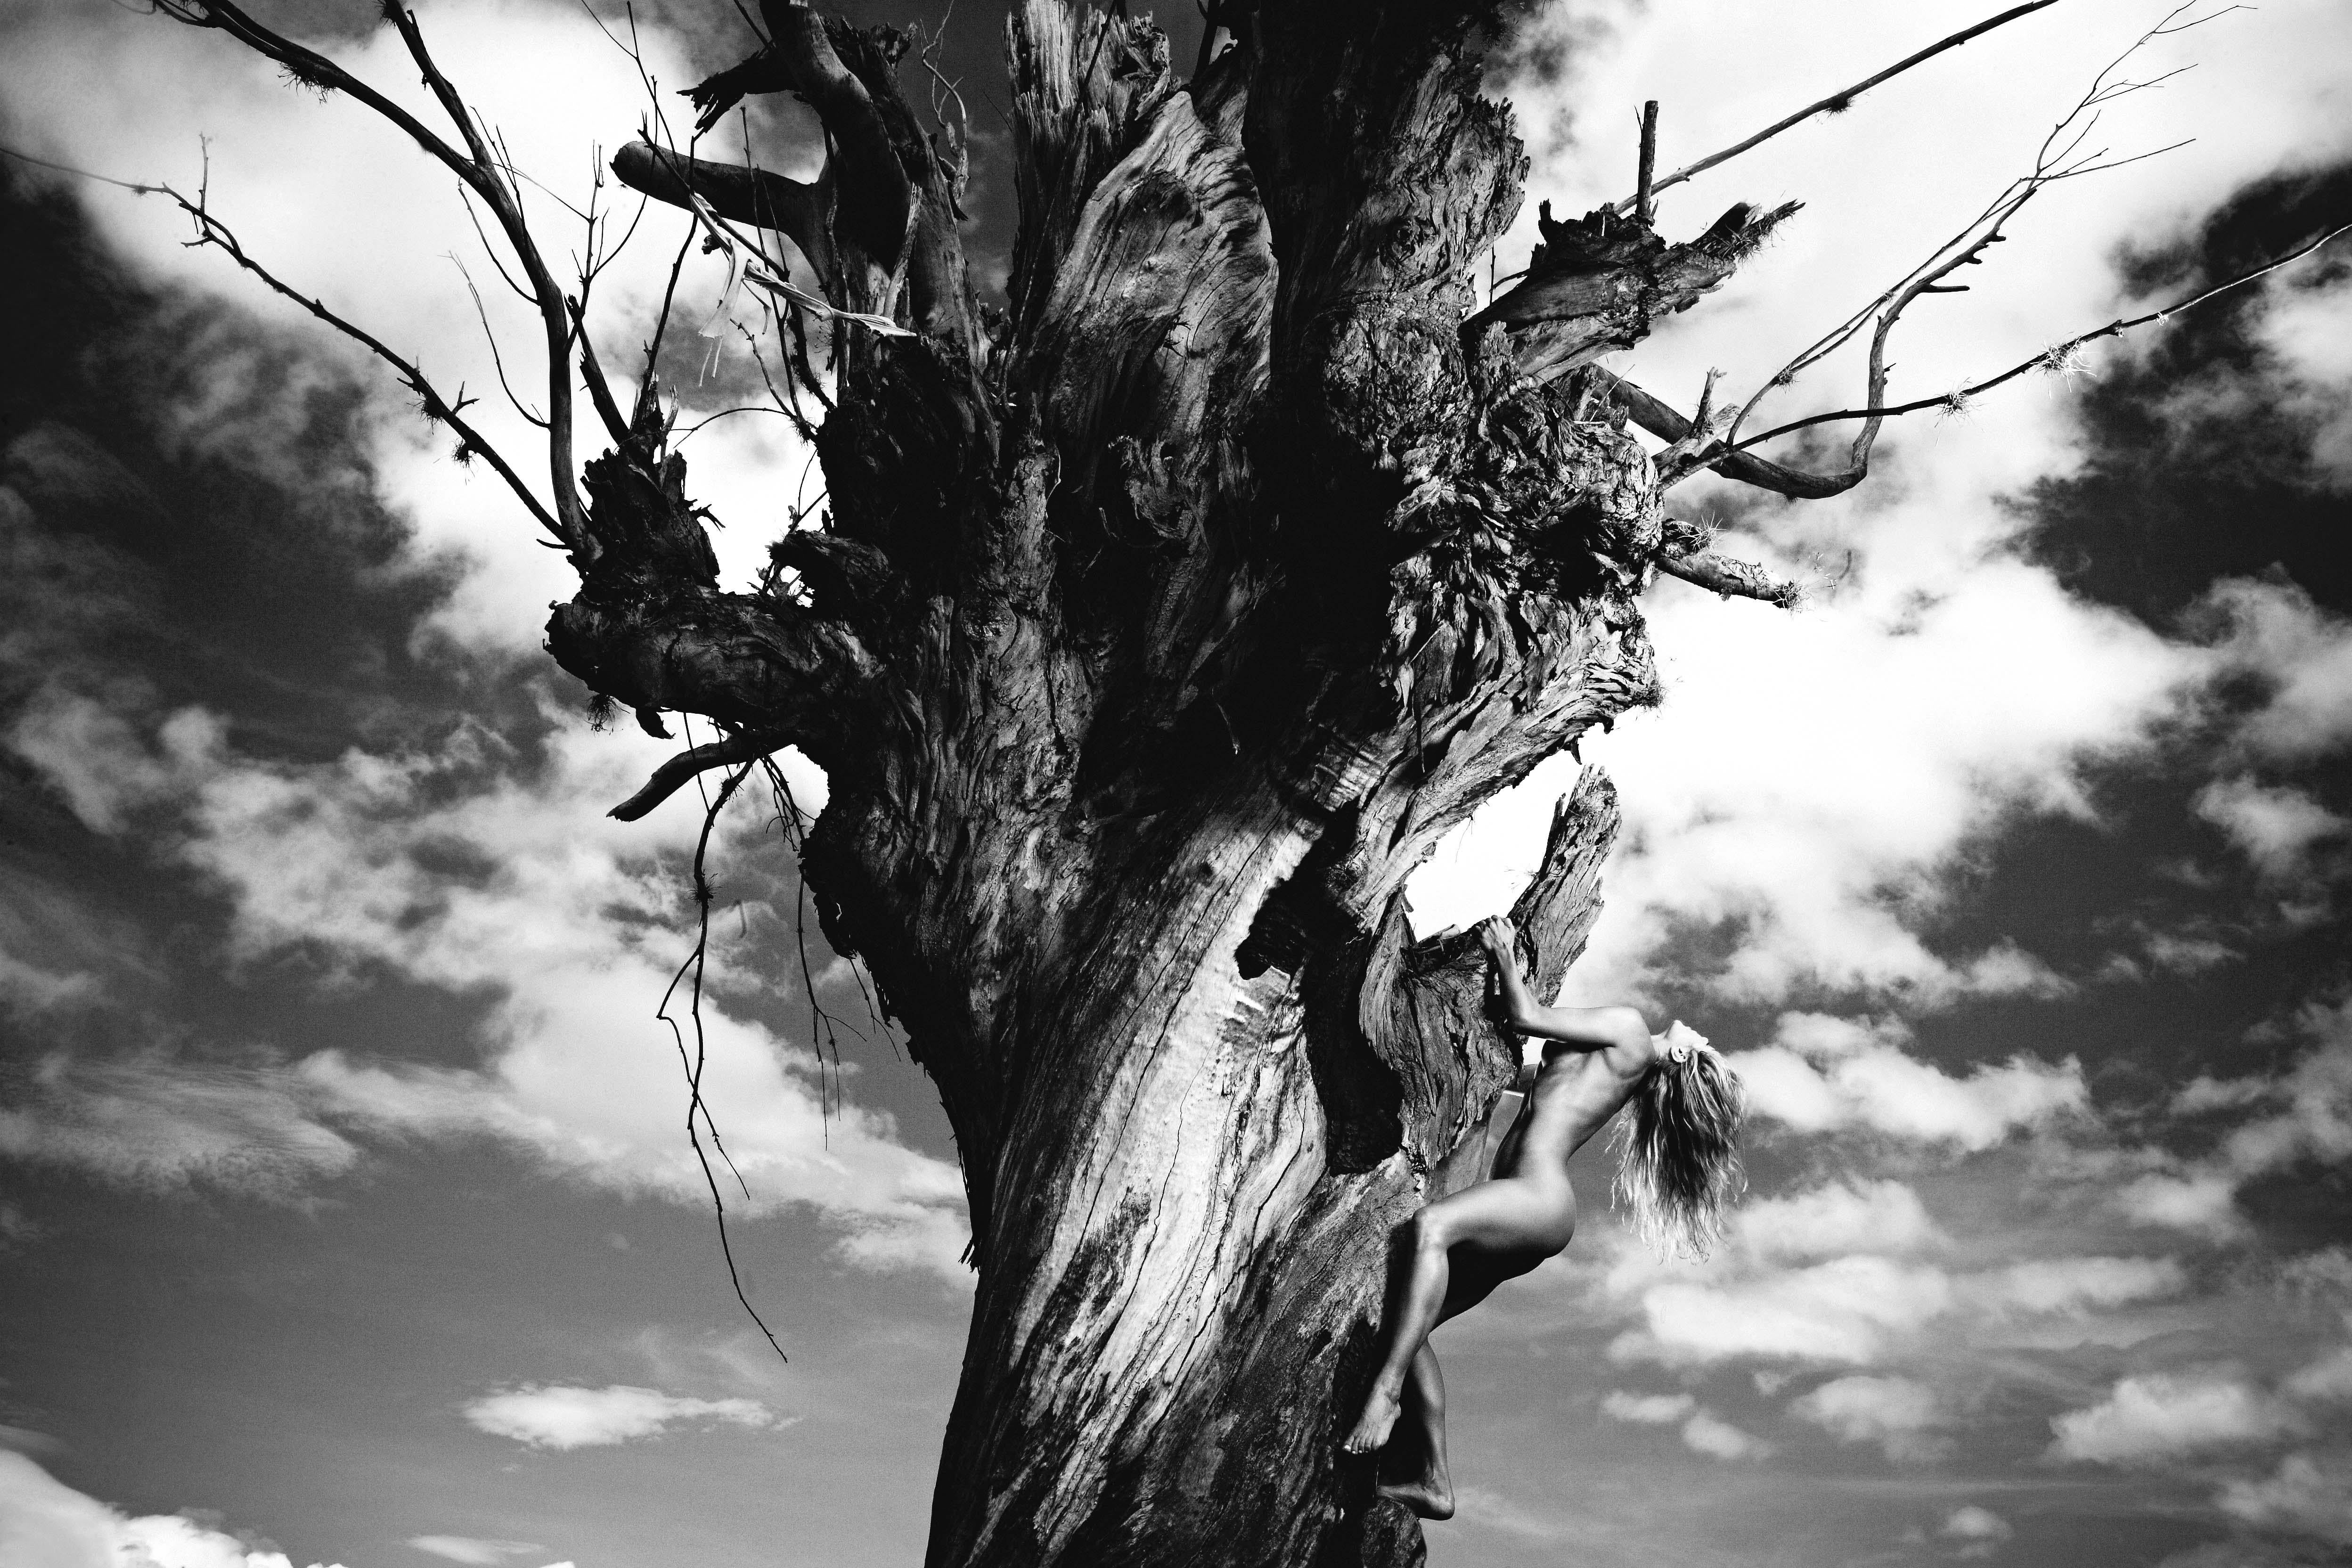 Half Angels Half Demons #12, Nude on a tree. Black and White photograph